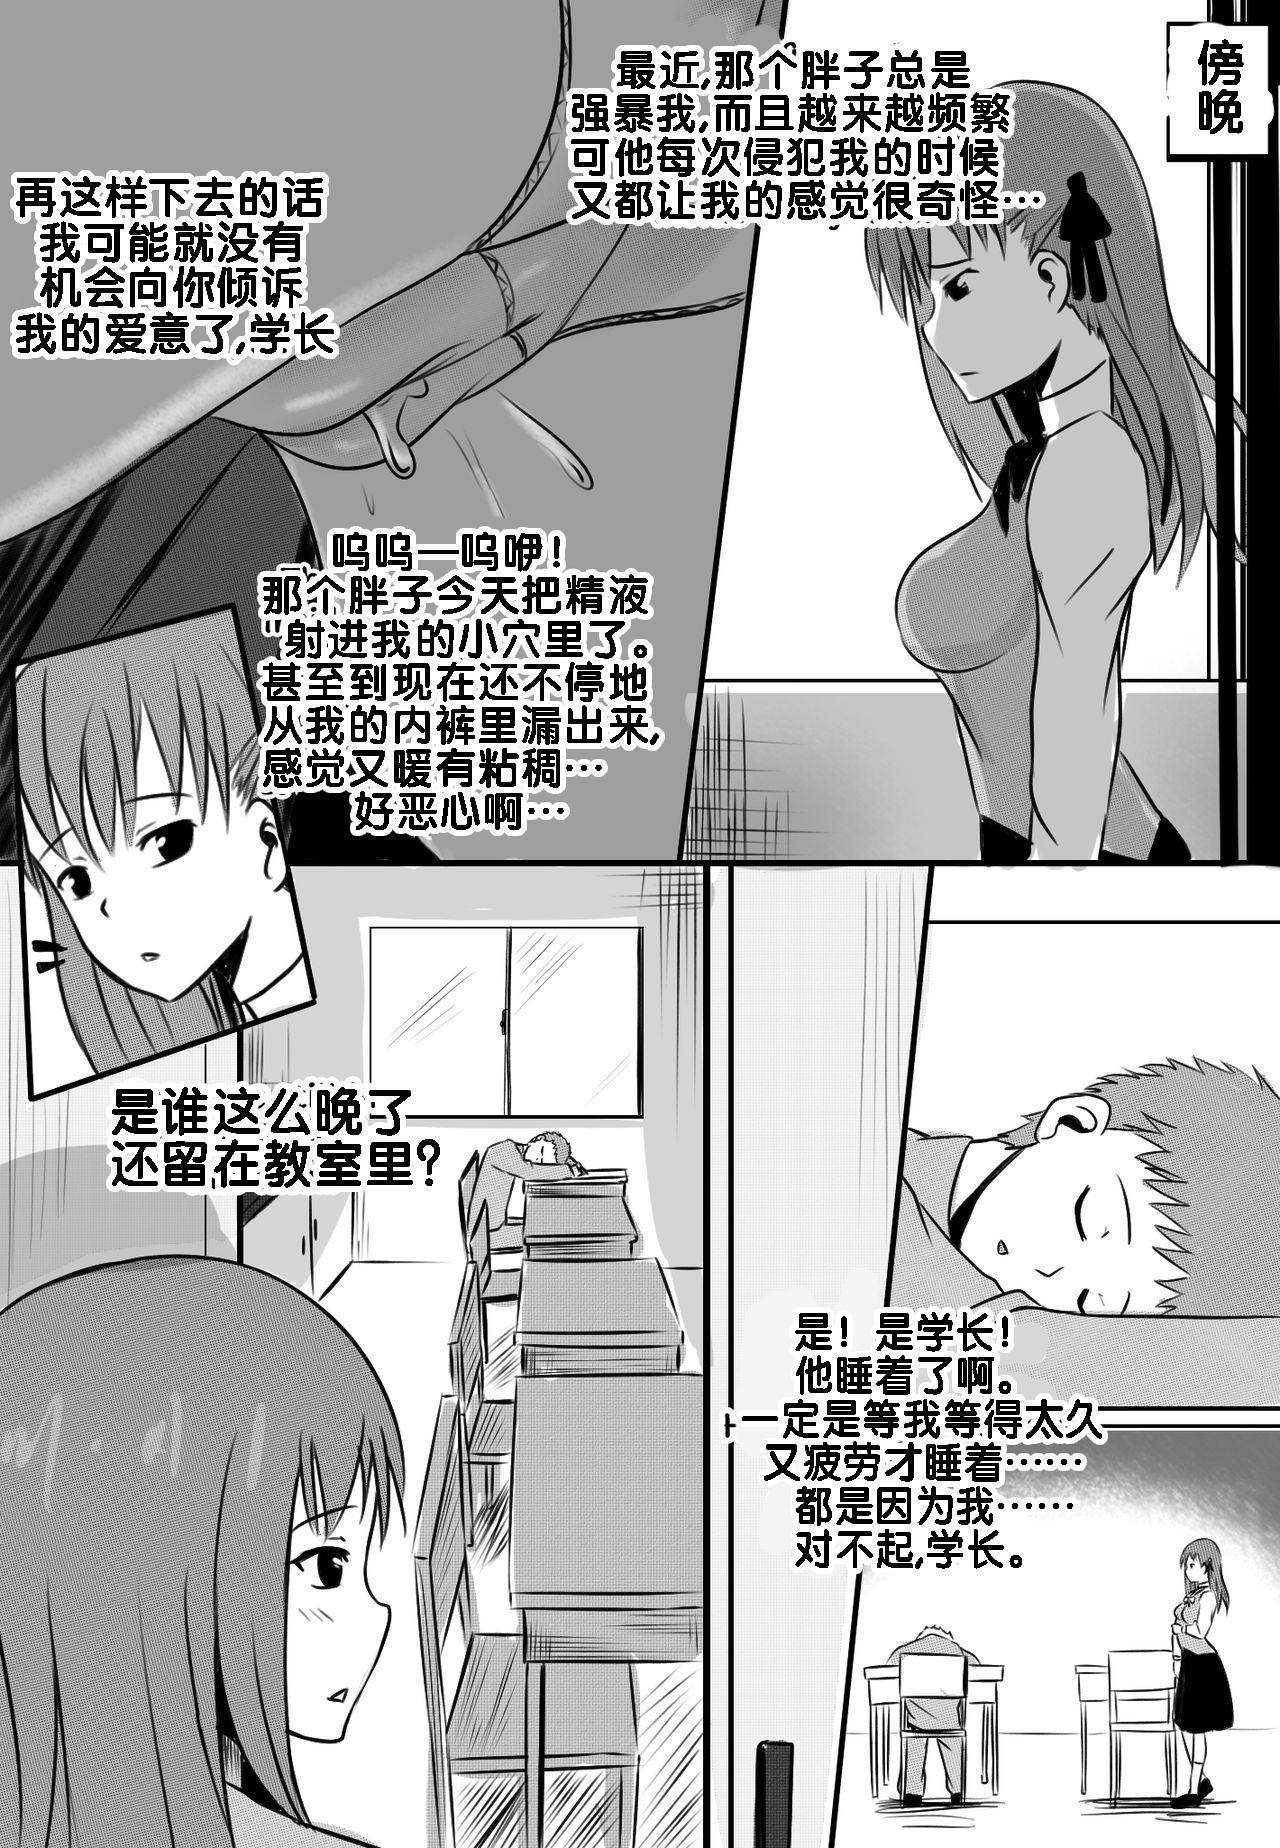 Oral Sex B-Trayal 10 - Fate stay night Spoon - Page 8